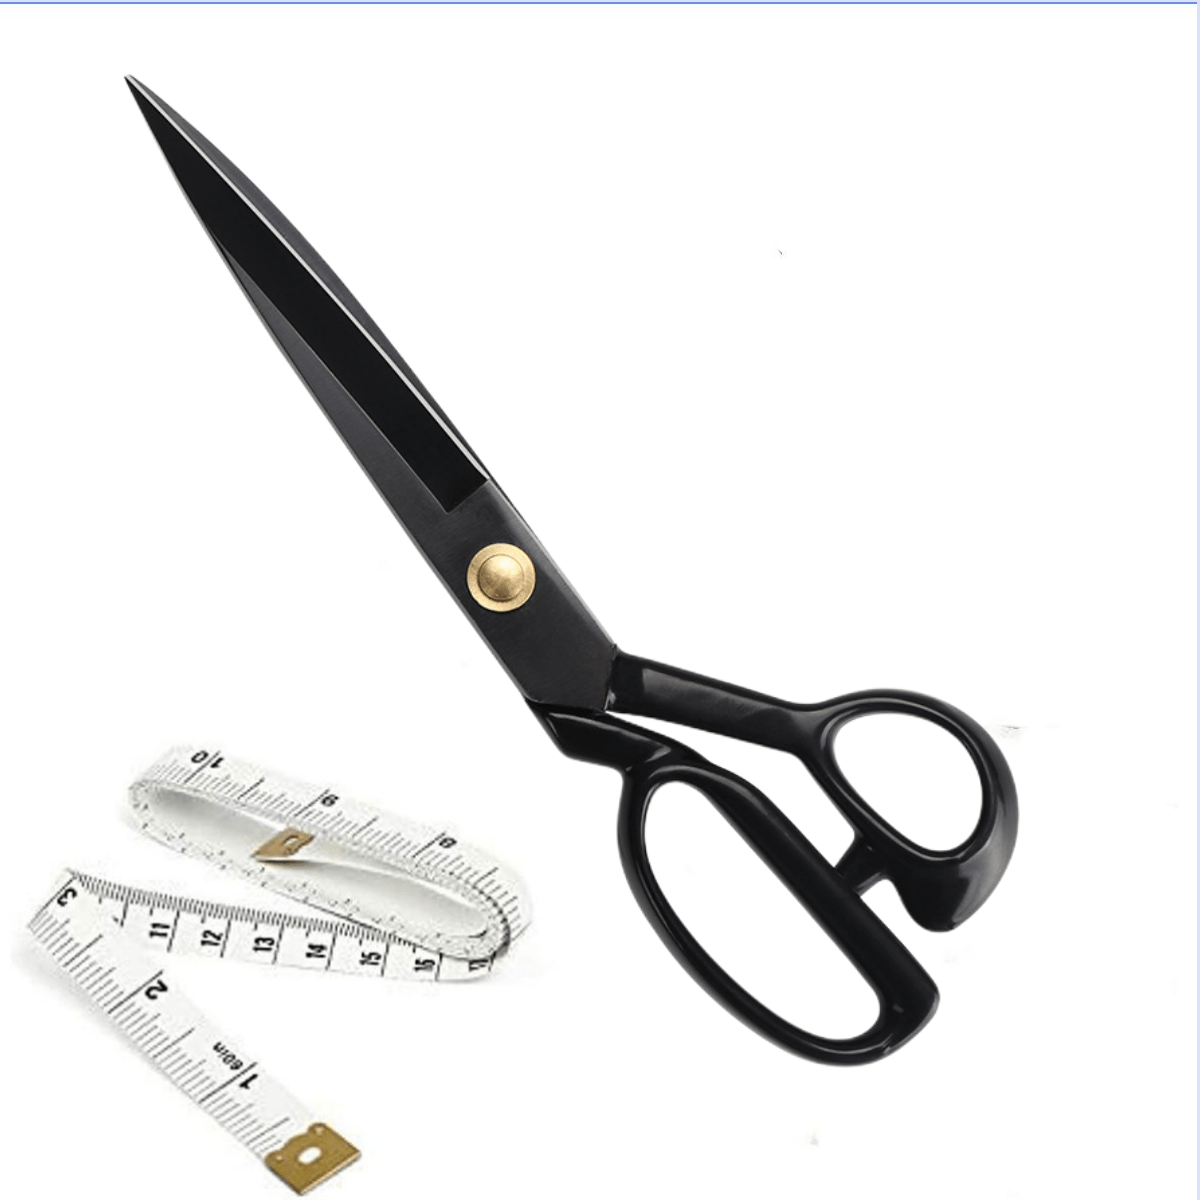 https://img.kwcdn.com/product/leather-sewing-shears/d69d2f15w98k18-67adb1f0/open/2023-04-15/1681521257831-228f8f65d2e2465a9418f54033101b4a-goods.jpeg